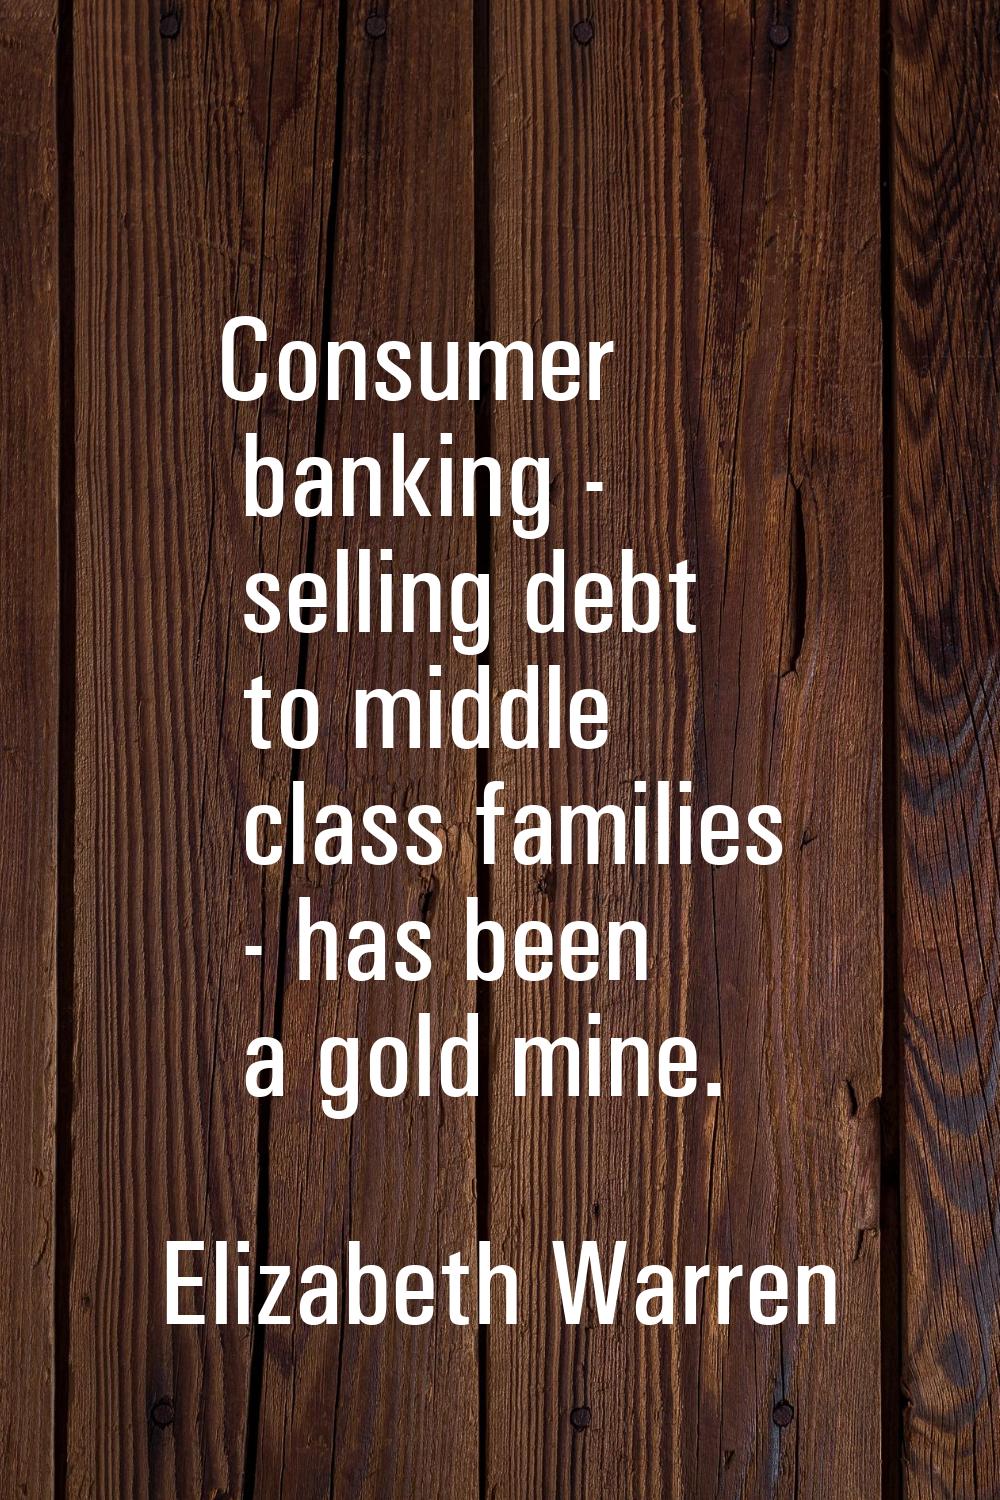 Consumer banking - selling debt to middle class families - has been a gold mine.